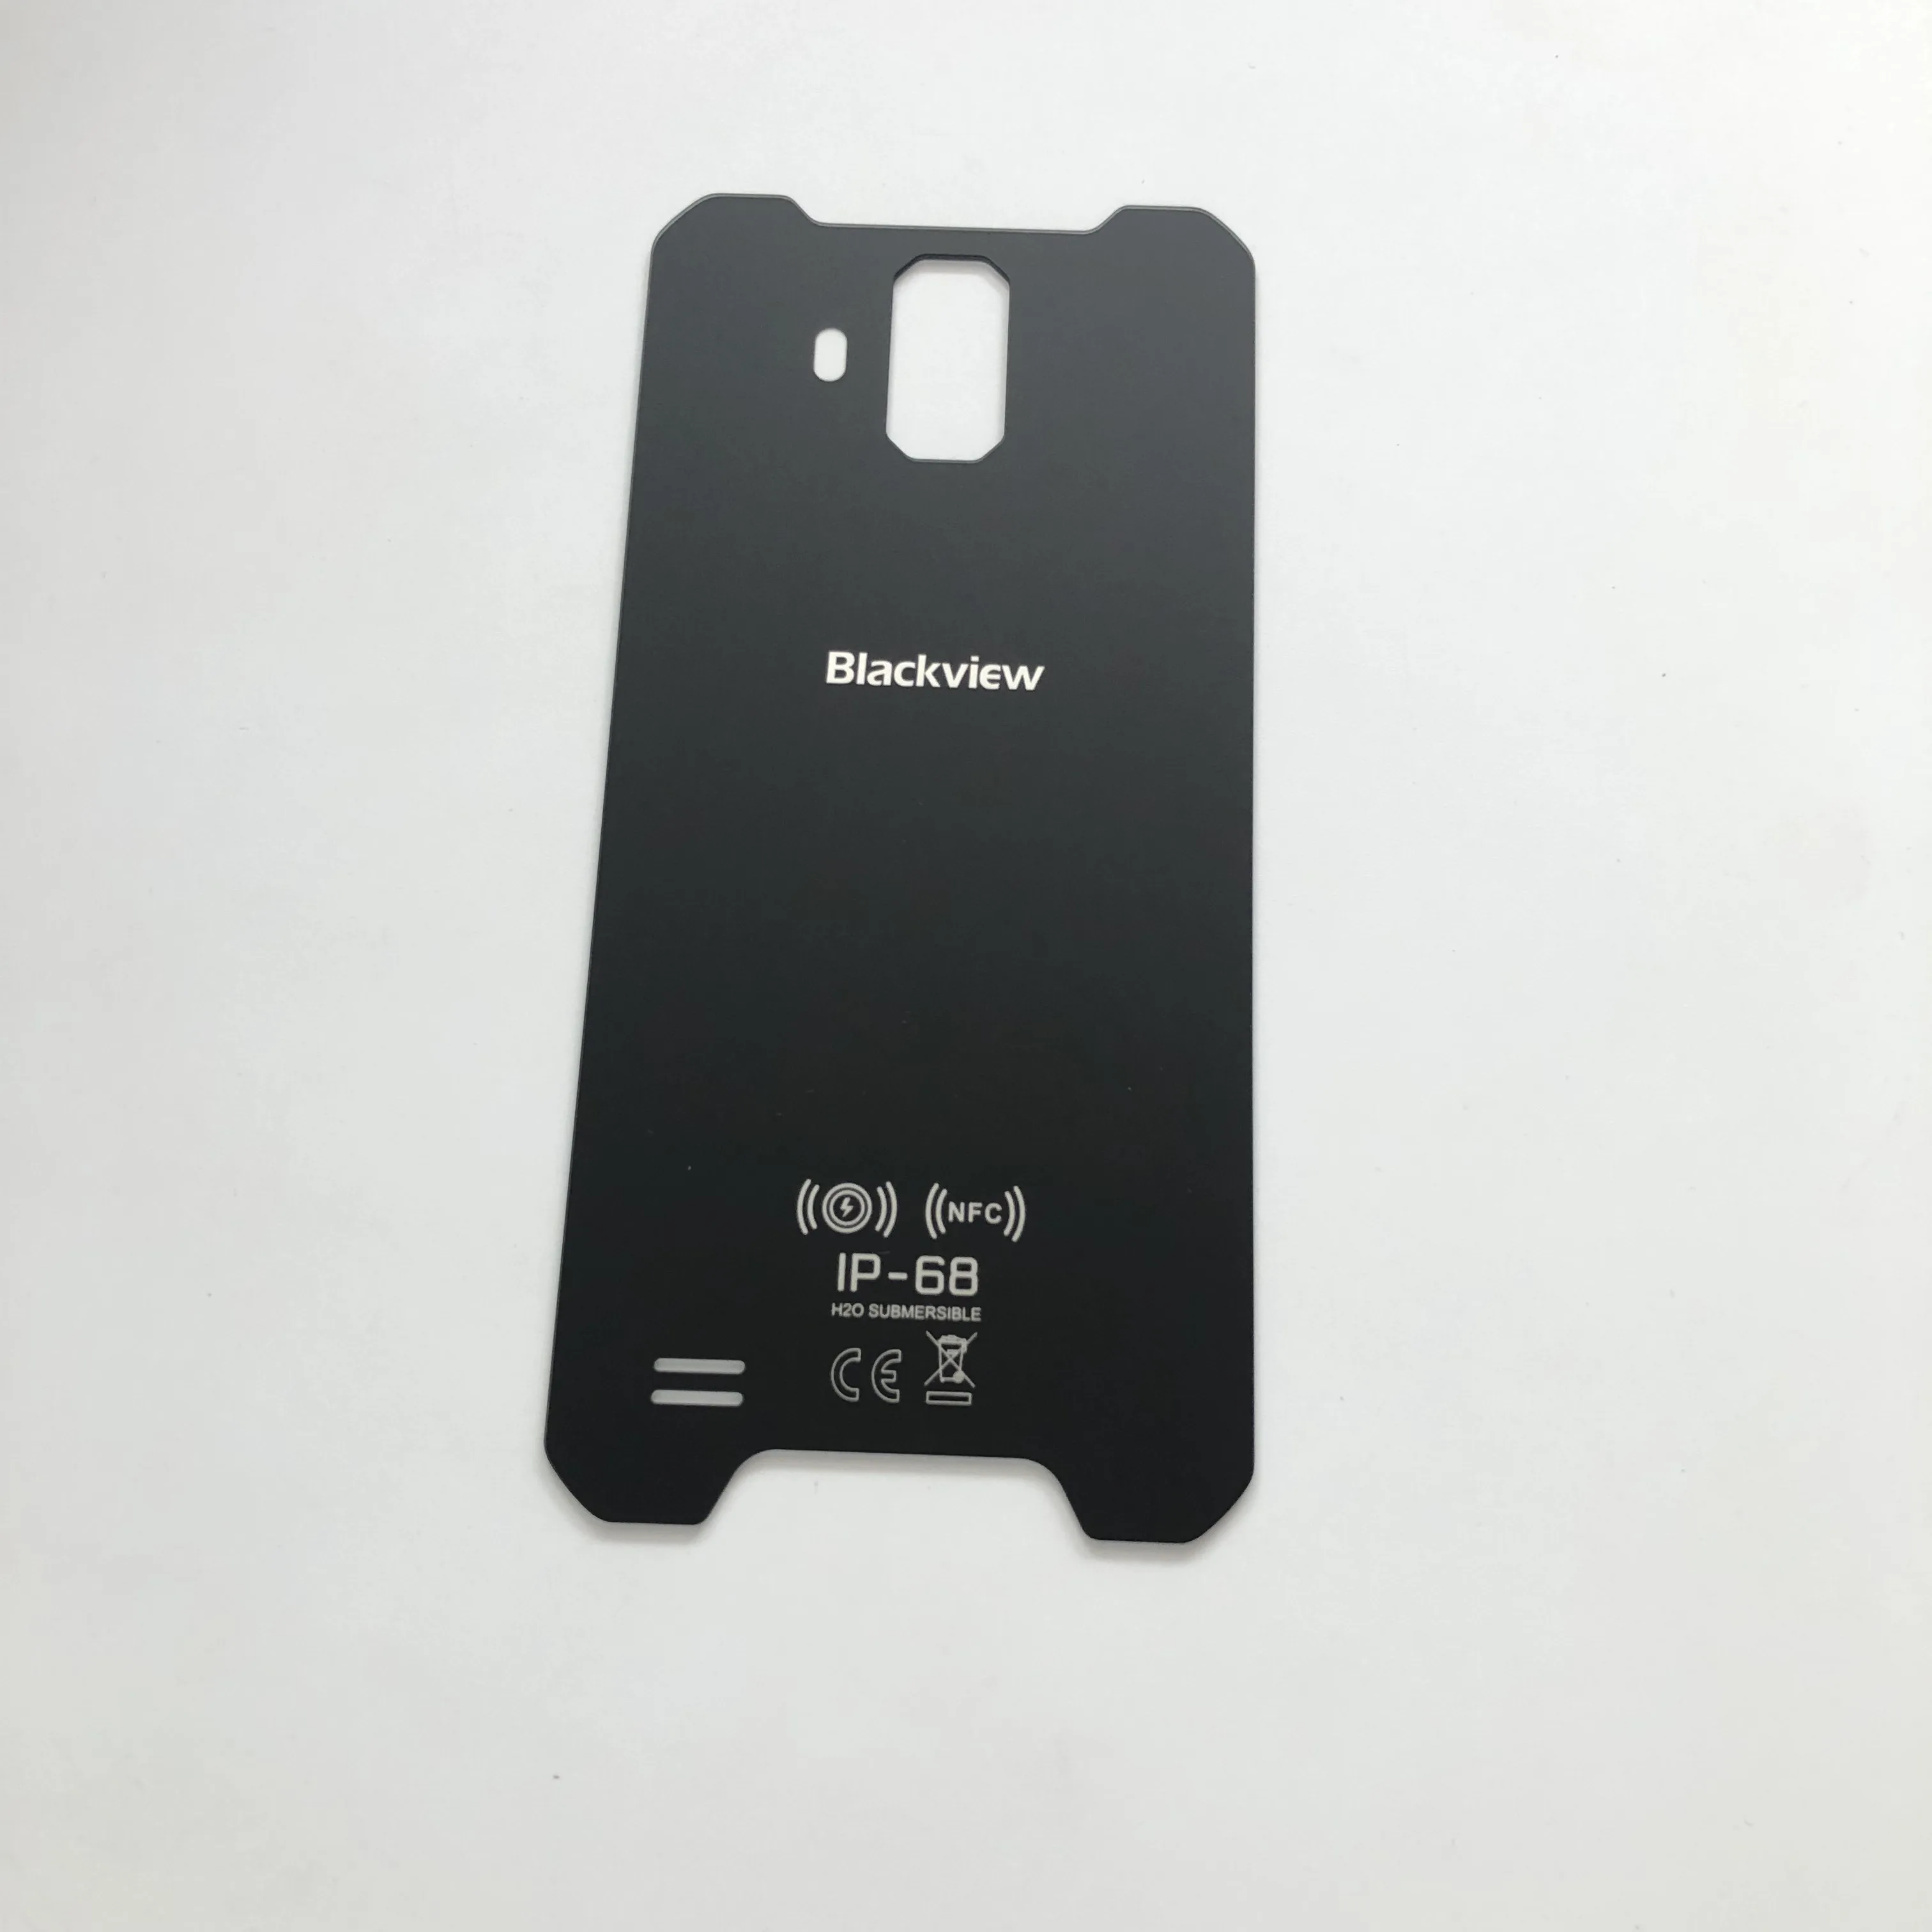 

Blackview BV9600 Original Used Protective Battery Case Cover Back Shell For Blackview BV9600 Pro Smartphone + Tracking Number